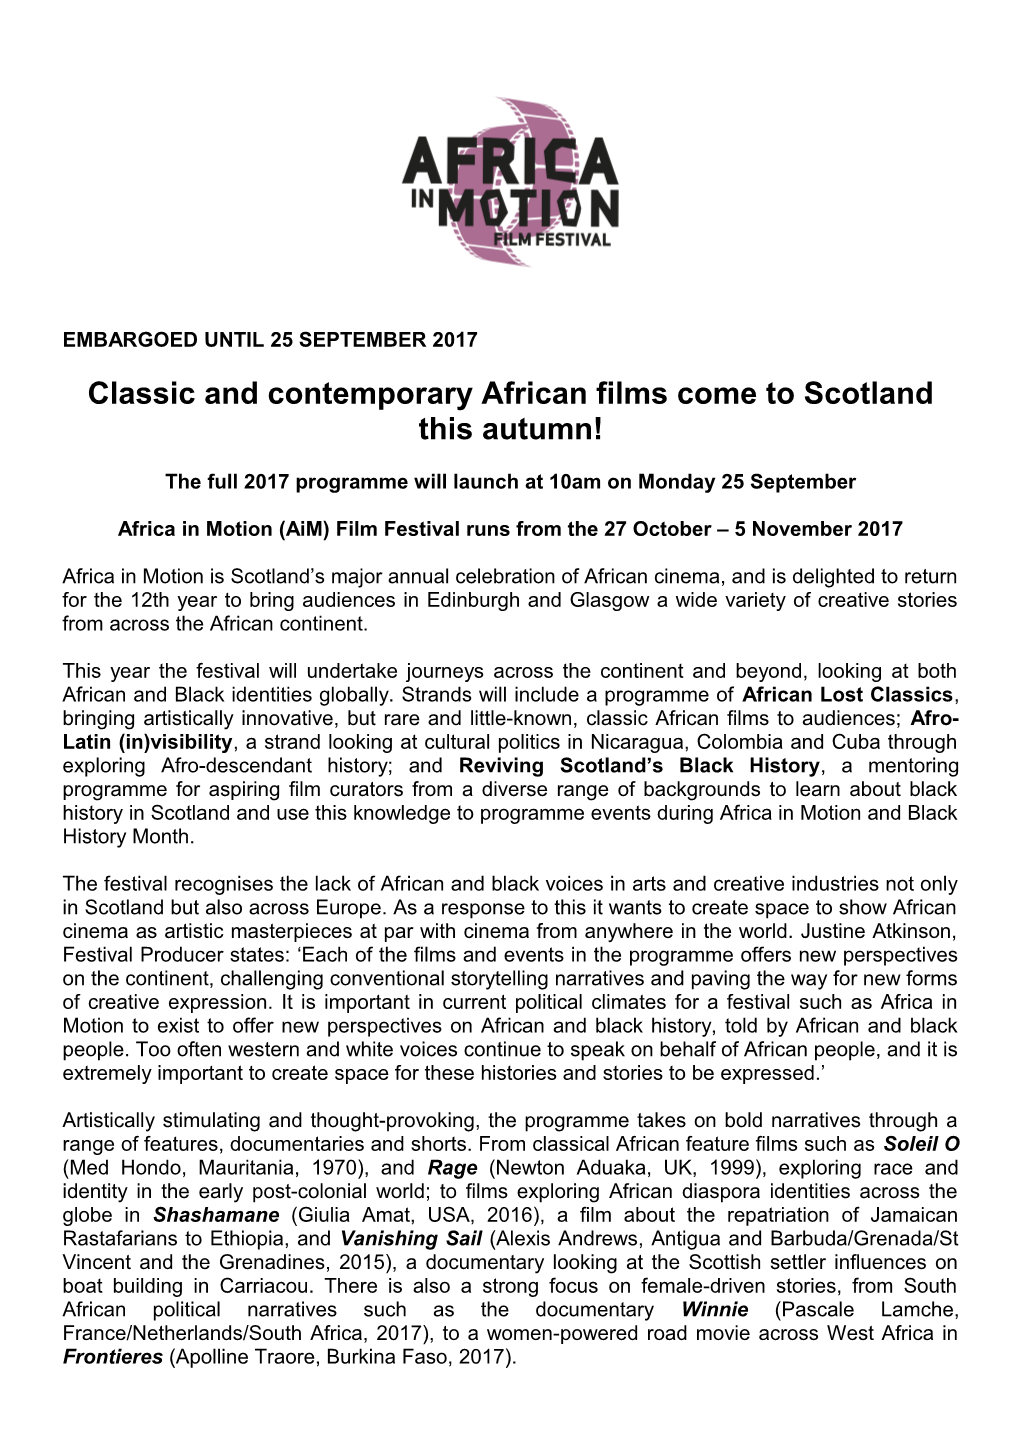 Classic and Contemporary African Films Come to Scotland This Autumn!